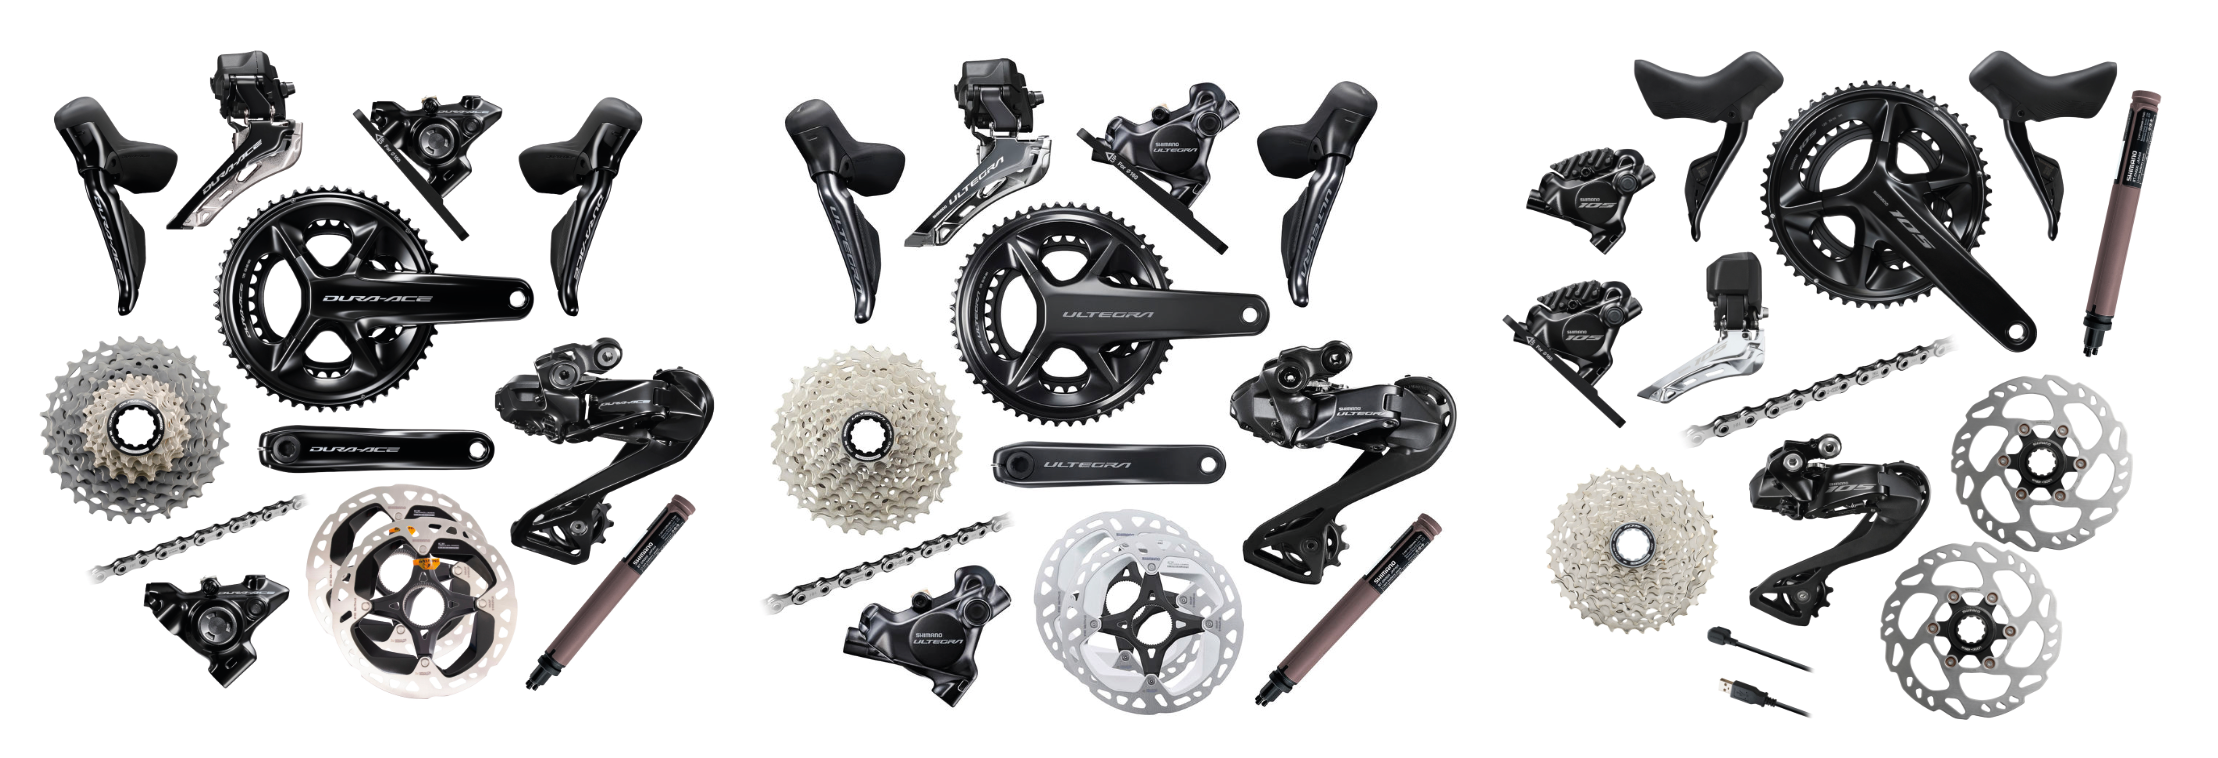 difference between dura ace ultegra and 105 di2 groupsets